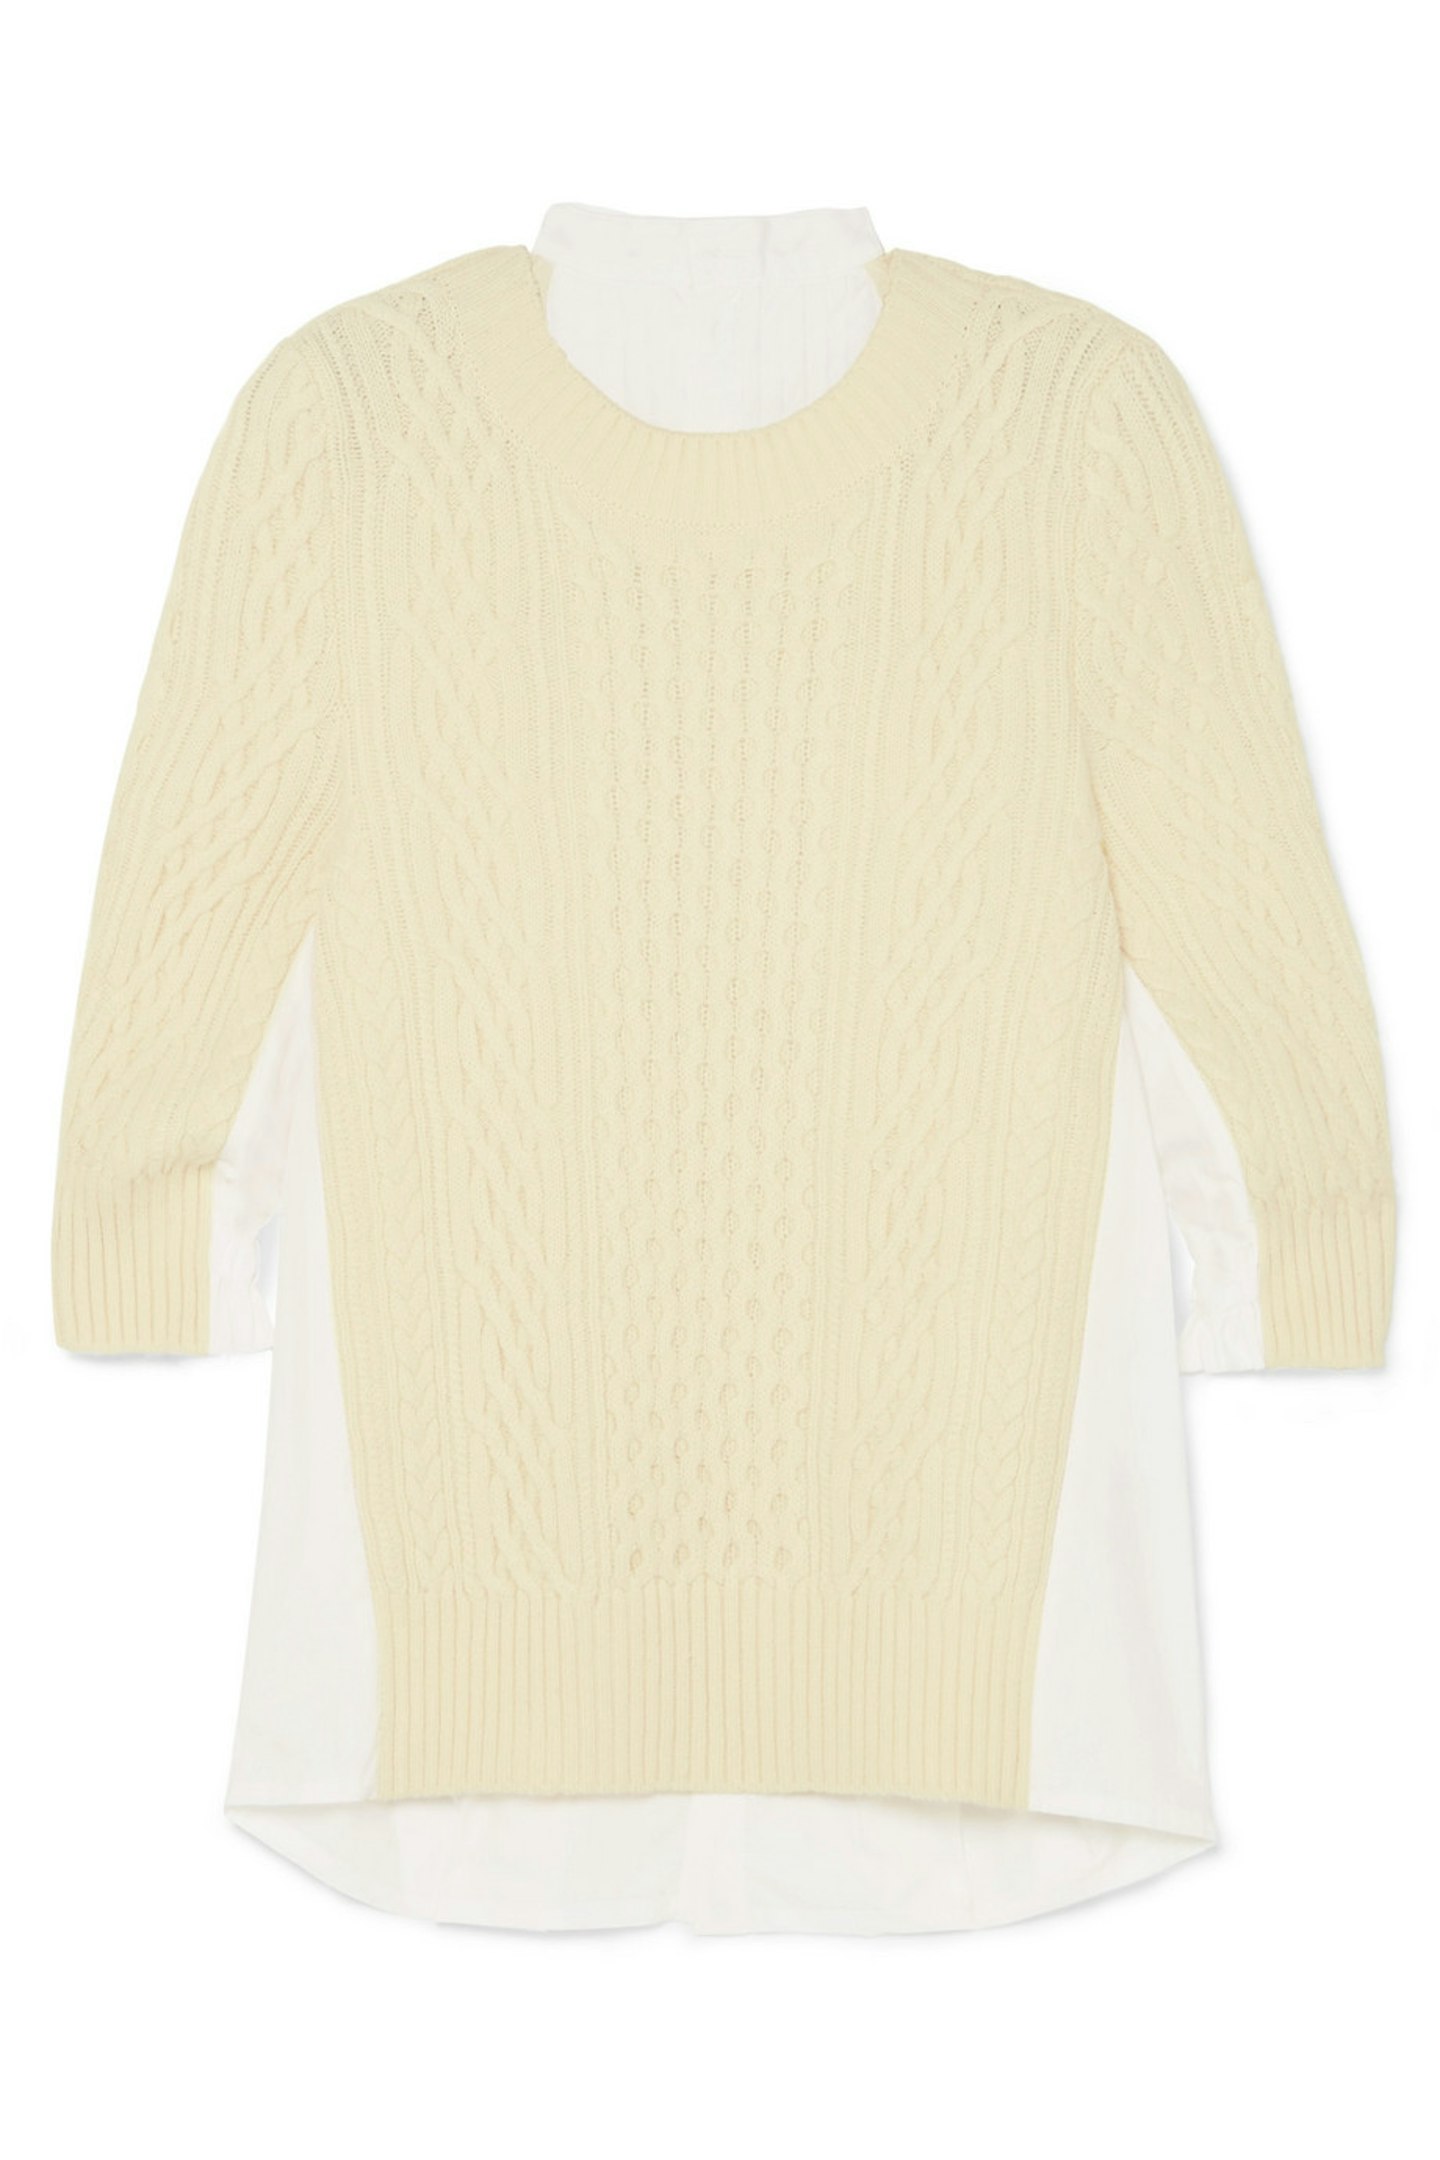 Sacai, Oversized Paneled Cable-Knit Wool And Poplin Top